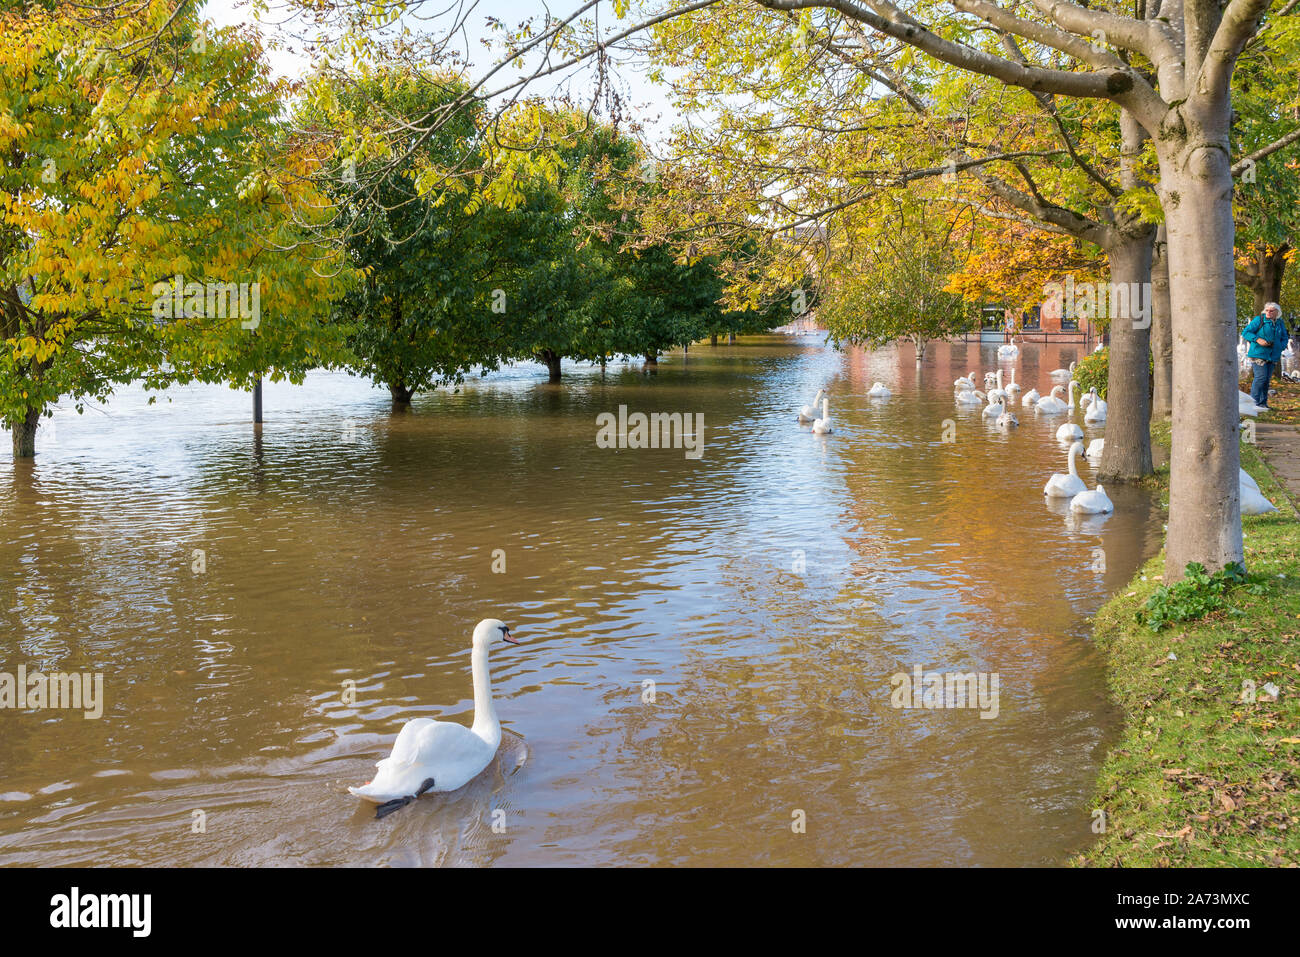 High water levels on the River Severn in Worcester lead to flooding in the surrounding area Stock Photo